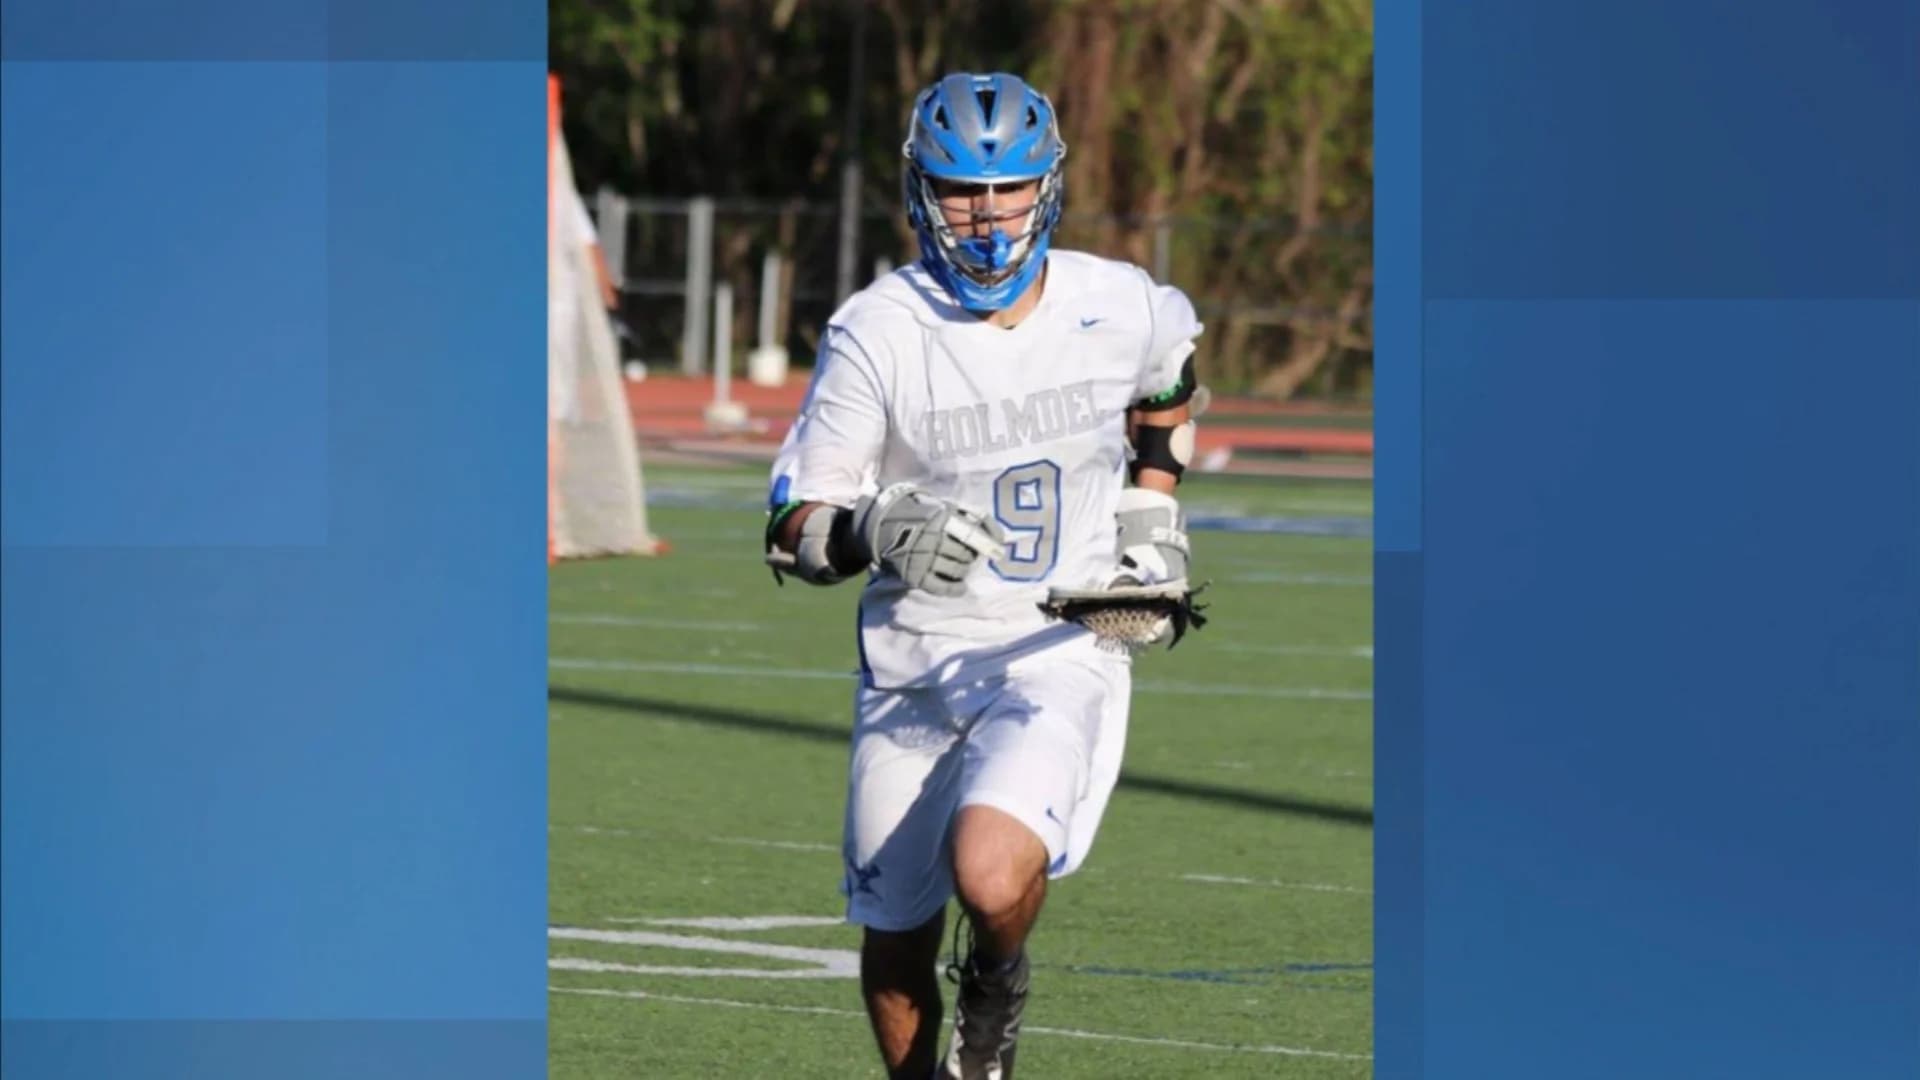 Holmdel community mourns loss of HS lacrosse player